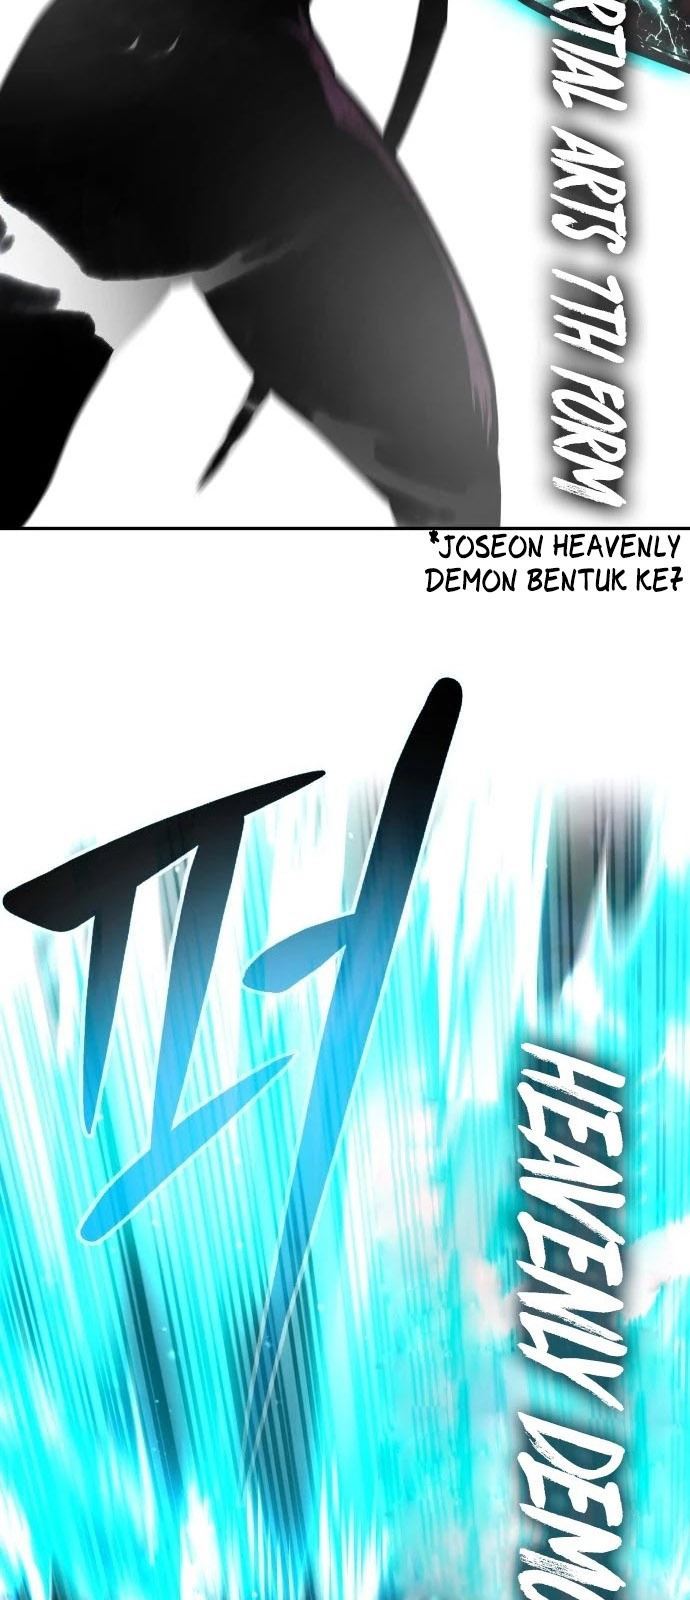 All Rounder Chapter 21 Bahasa Indonesia